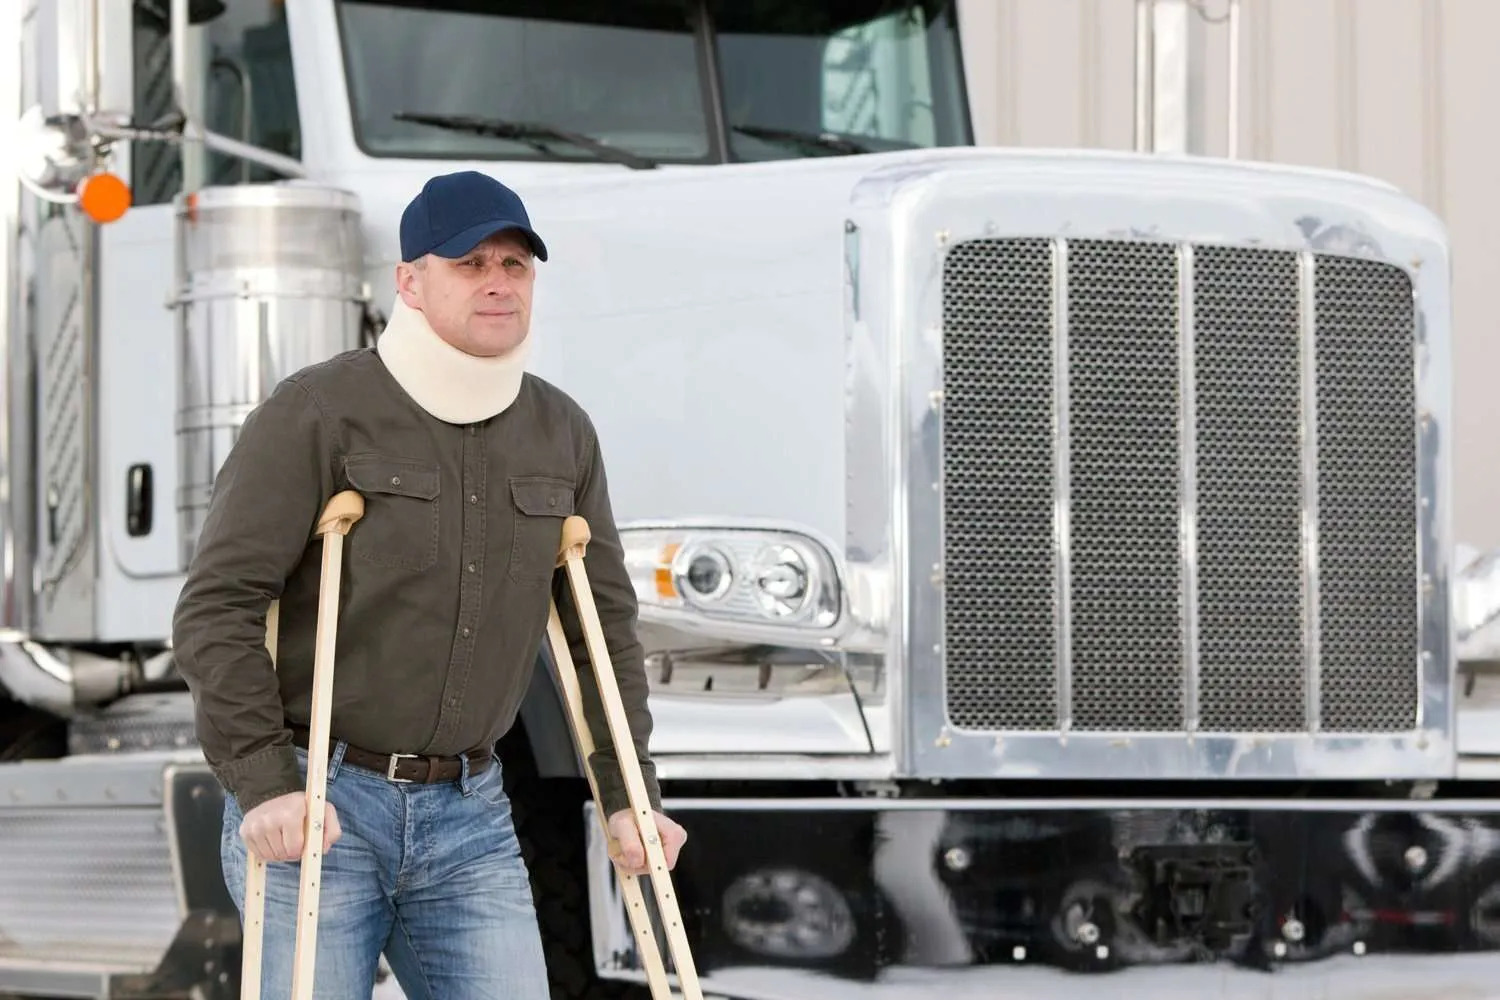 Trucking: Am I really protected if I get injured on the job?